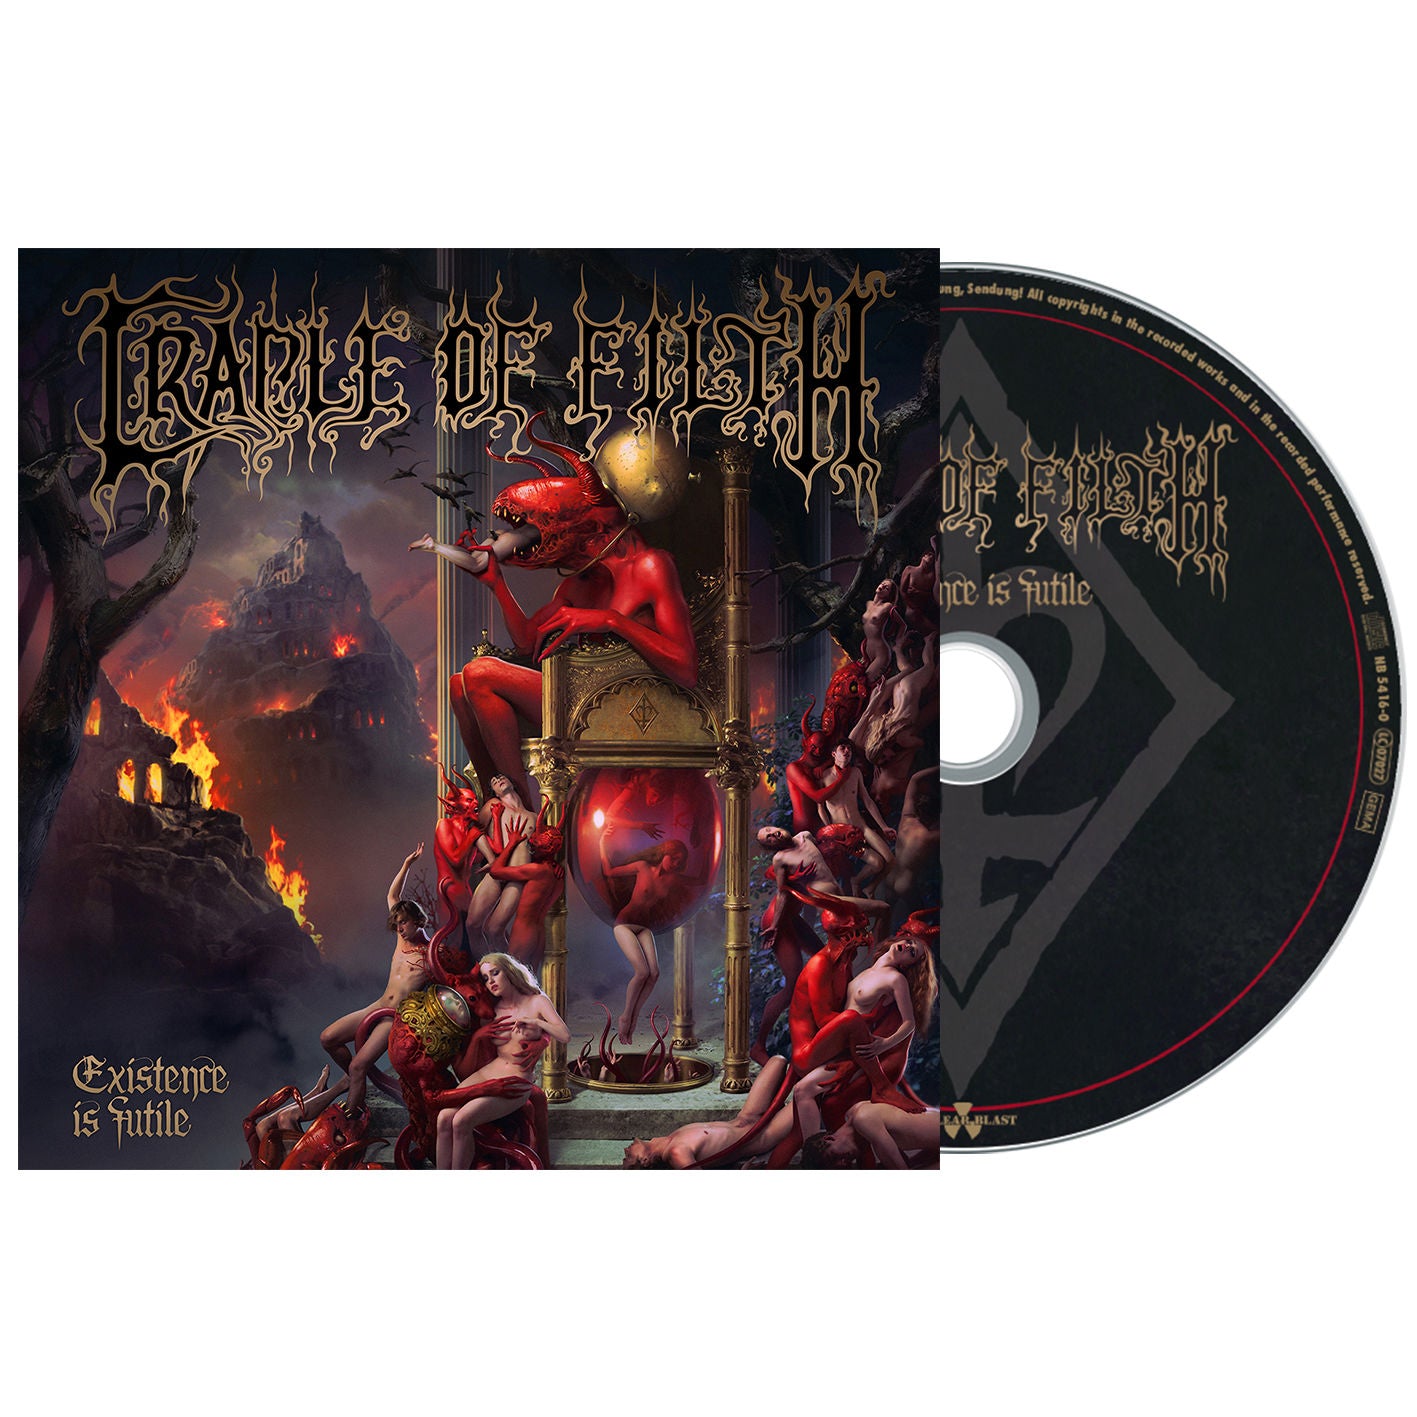 Cradle of Filth - Existence Is Futile: Limited Edition CD